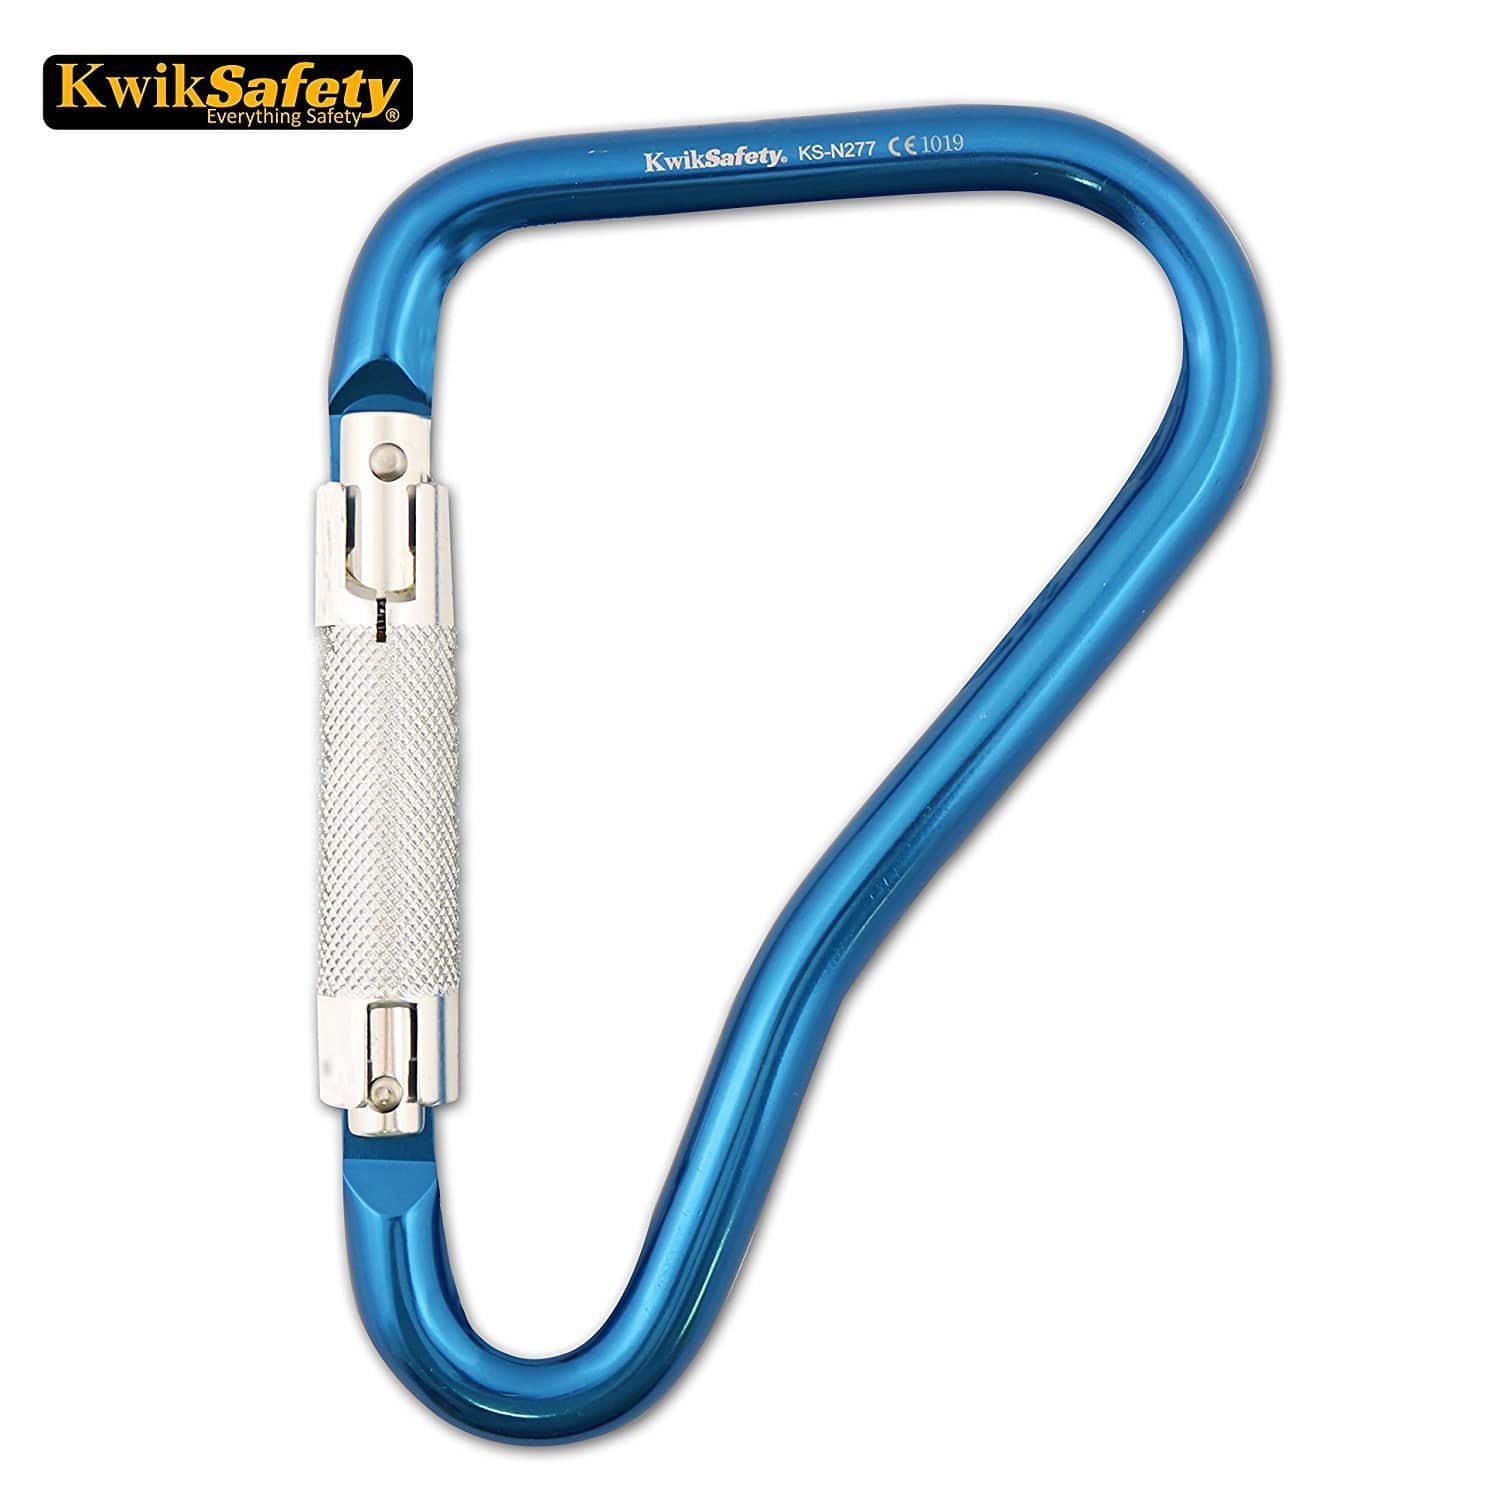 Klein Tools TT2 Tool Tether with Triple-Locking Carabiner has 15